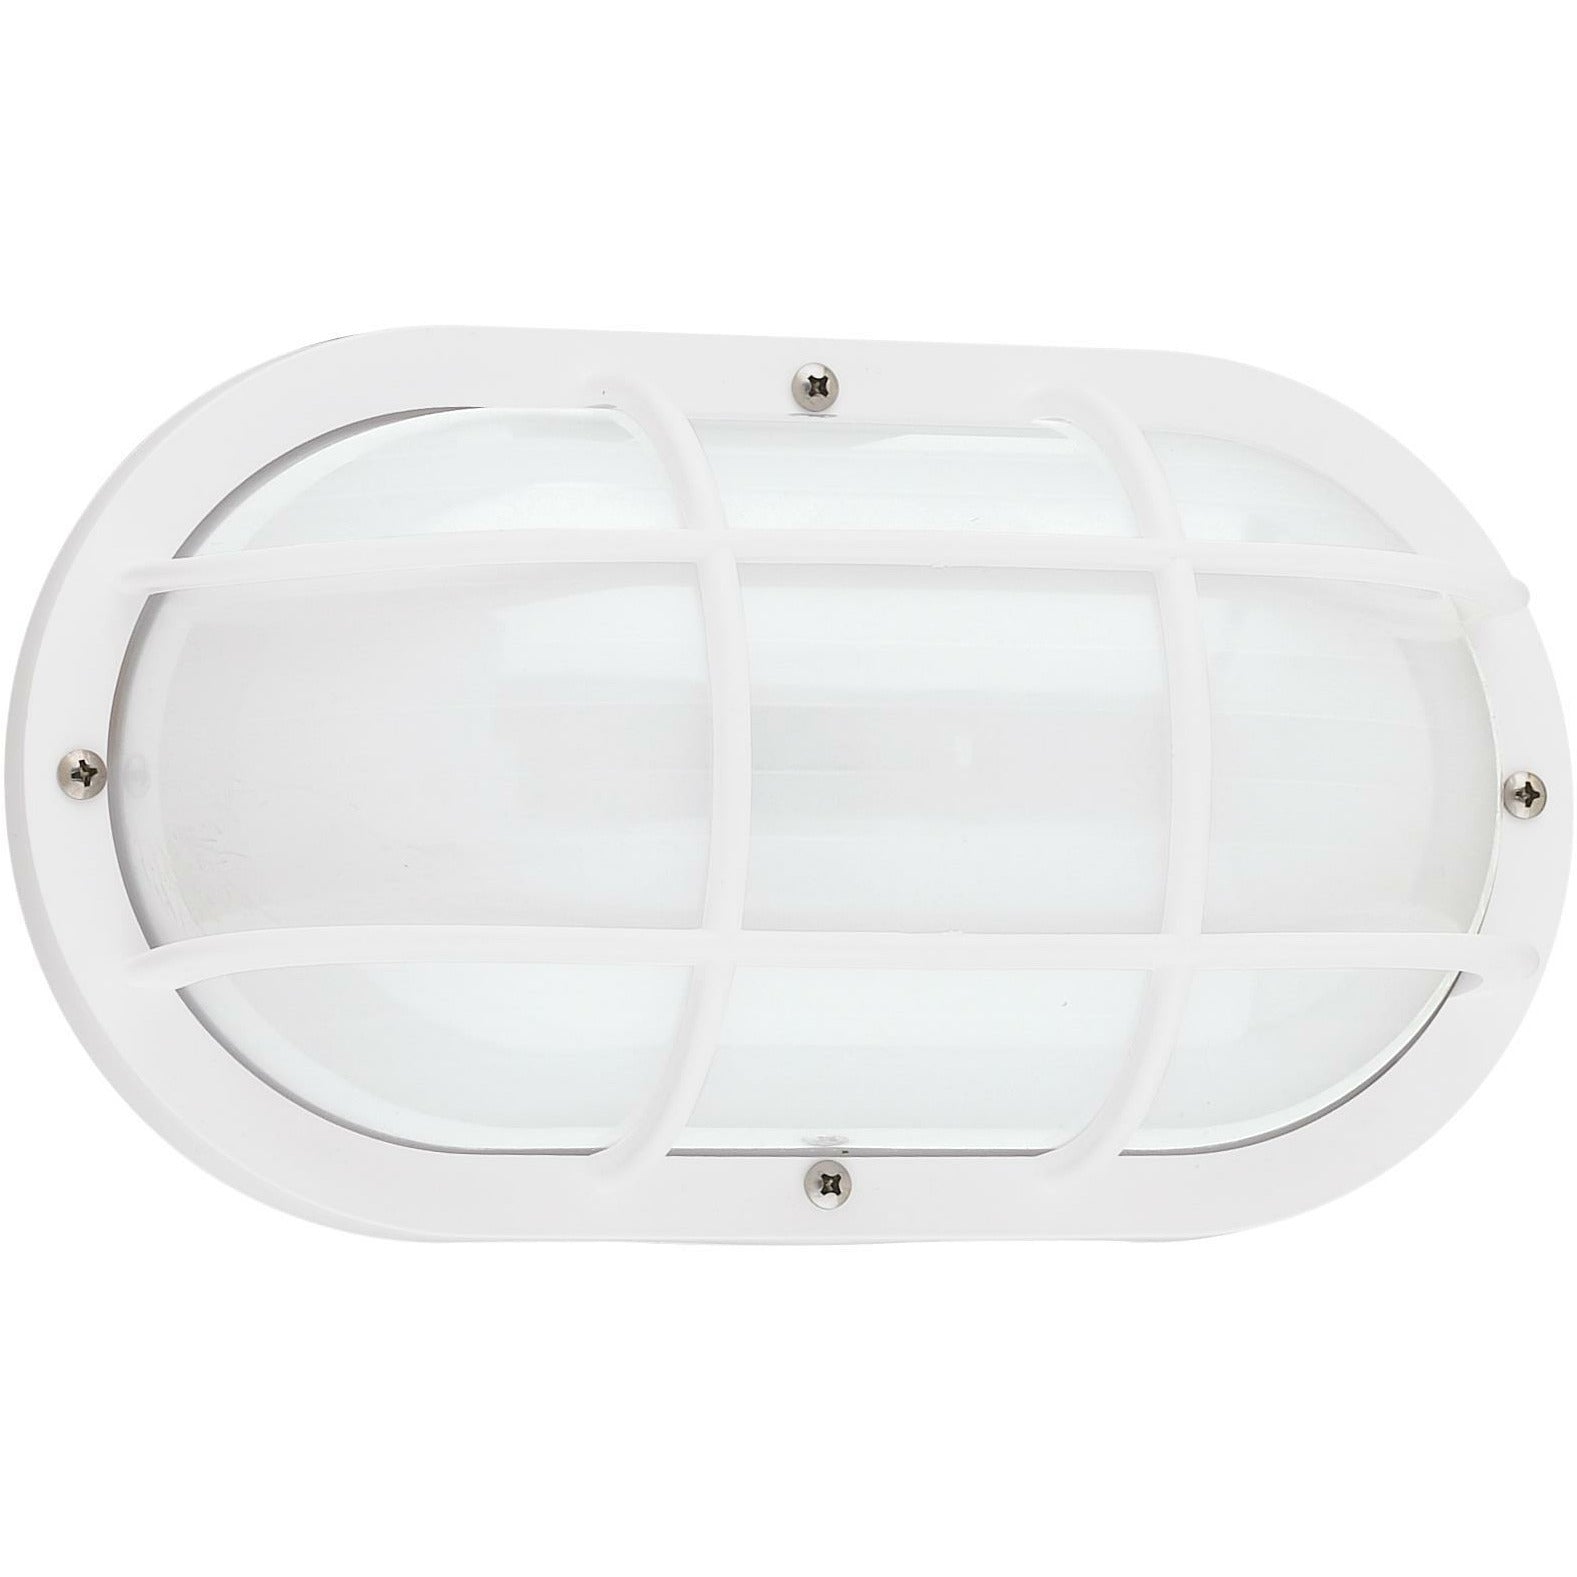 Bayside Outdoor Wall Light White